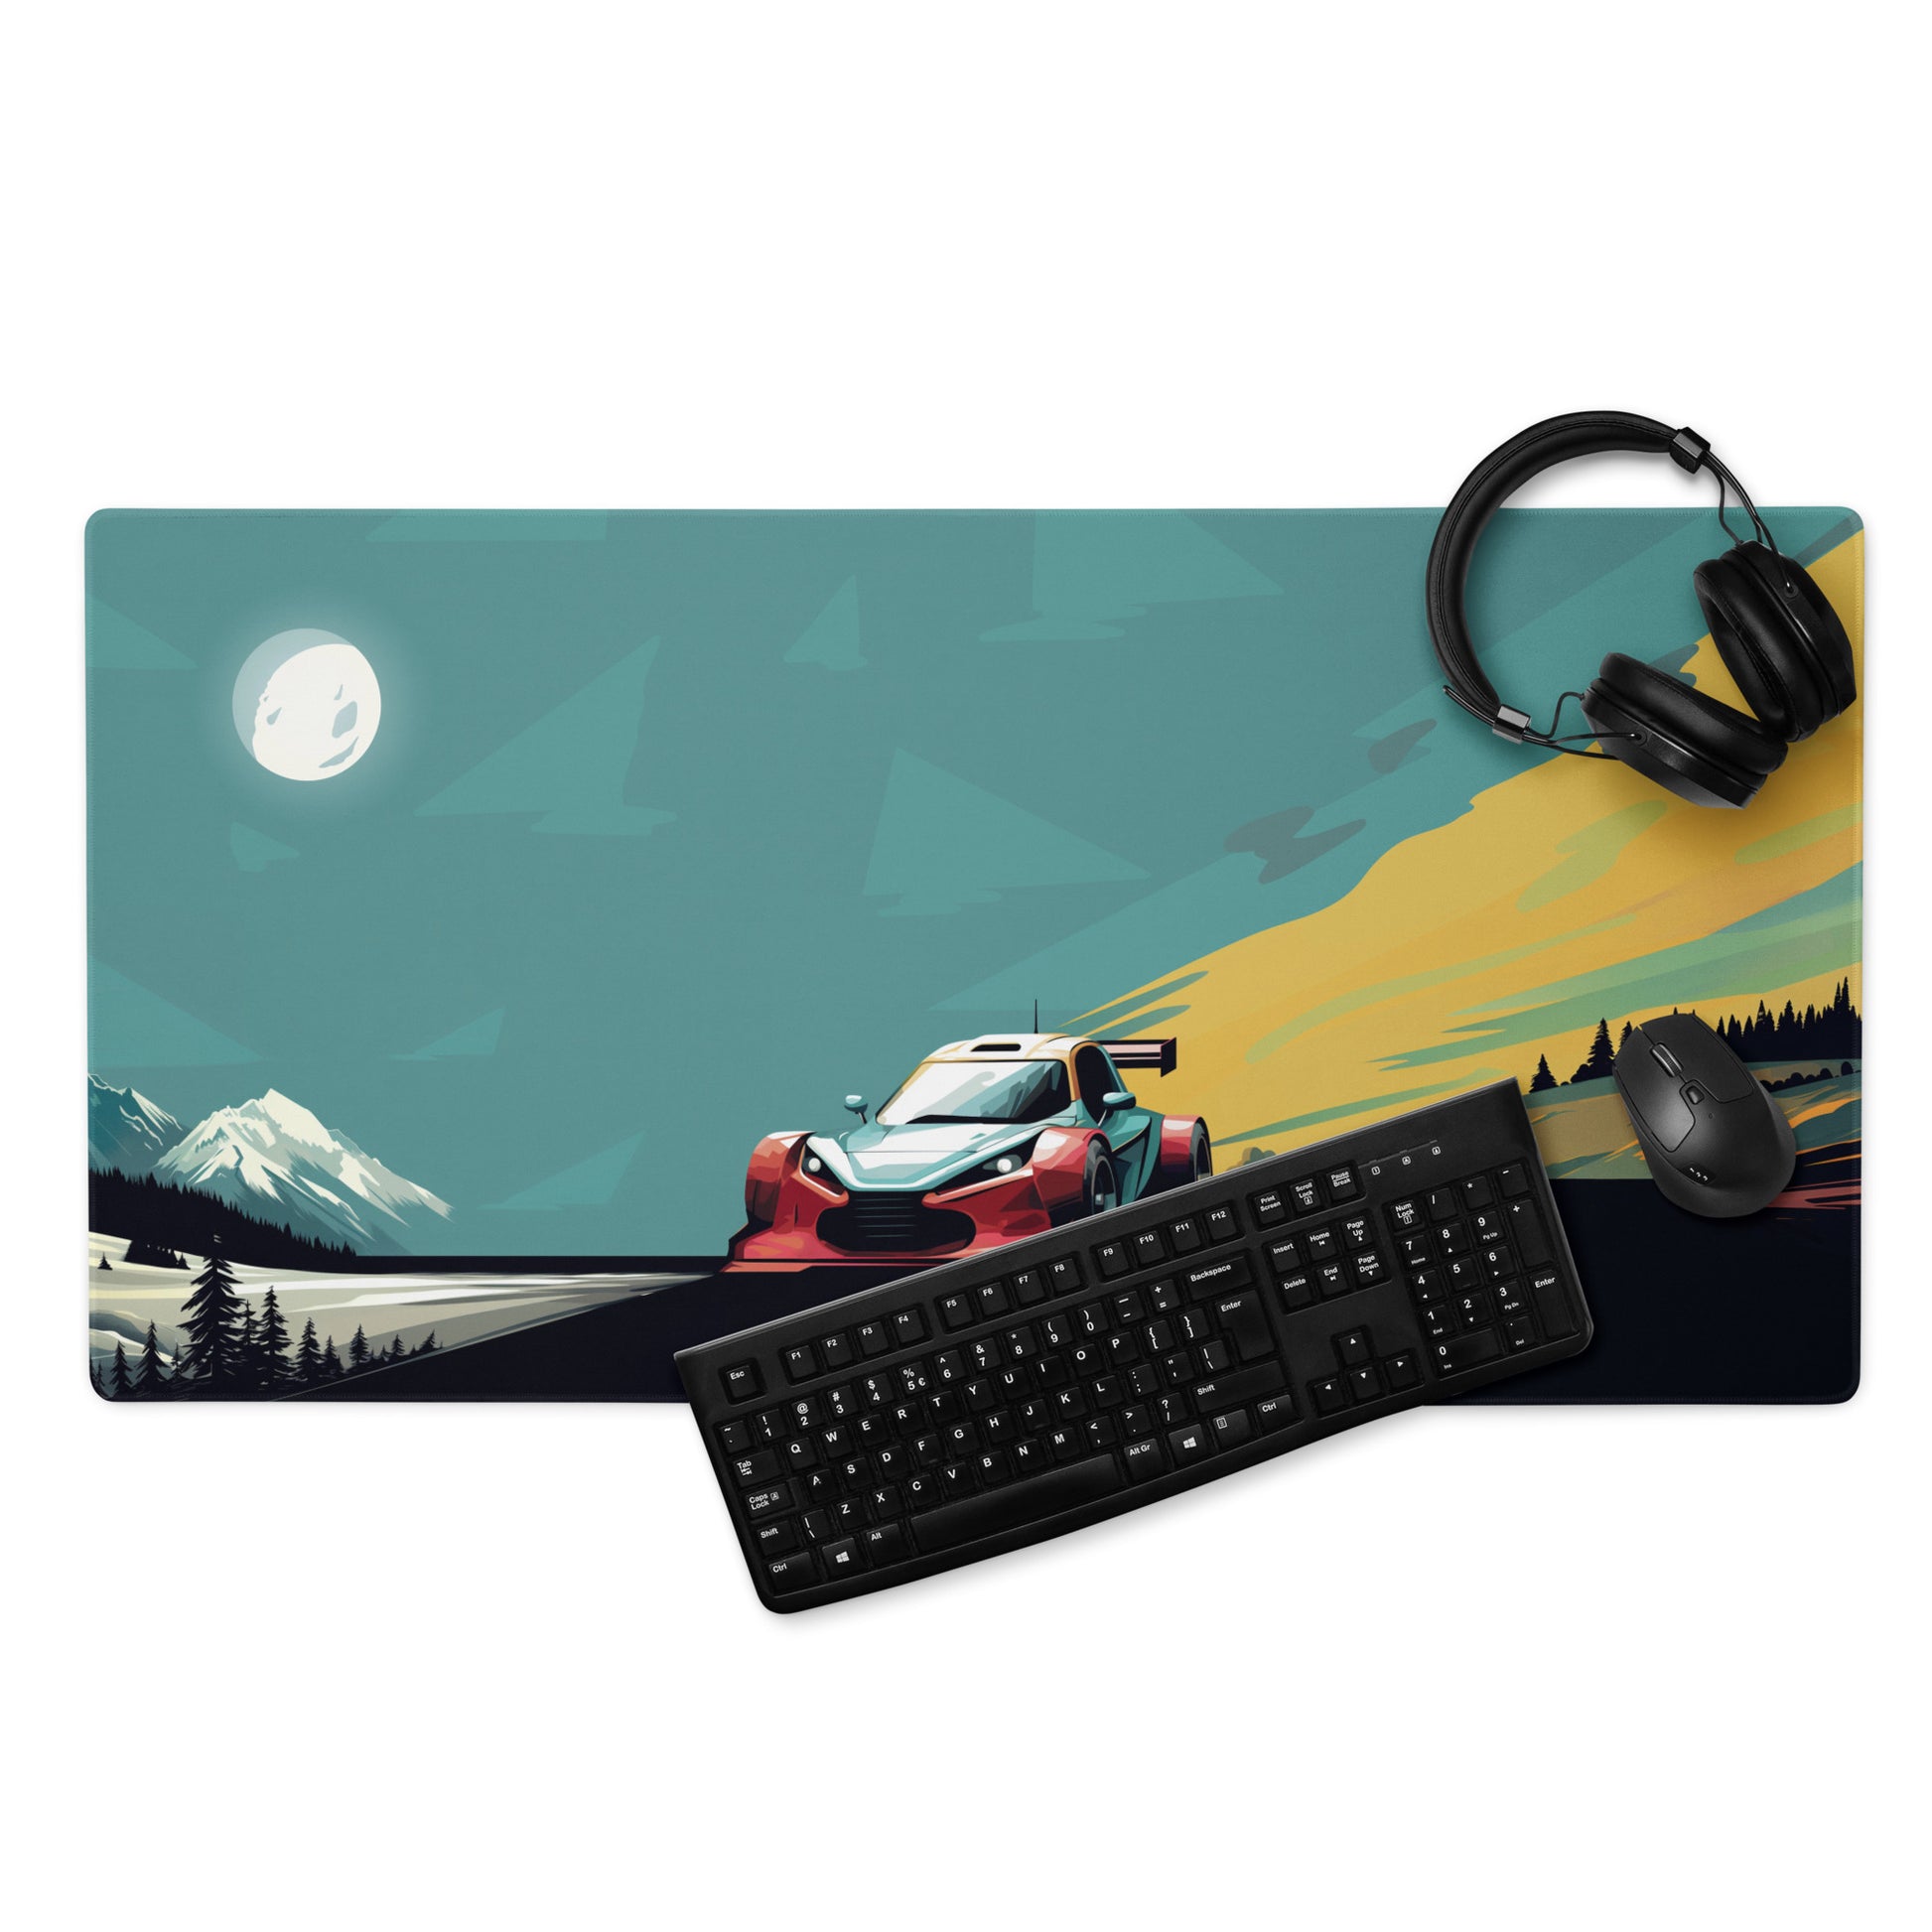 A 36" x 18" gaming desk pad with a futuristic GT car racing through the mountains displayed with a keyboard, headphones and a mouse. Blue and Grey in color.